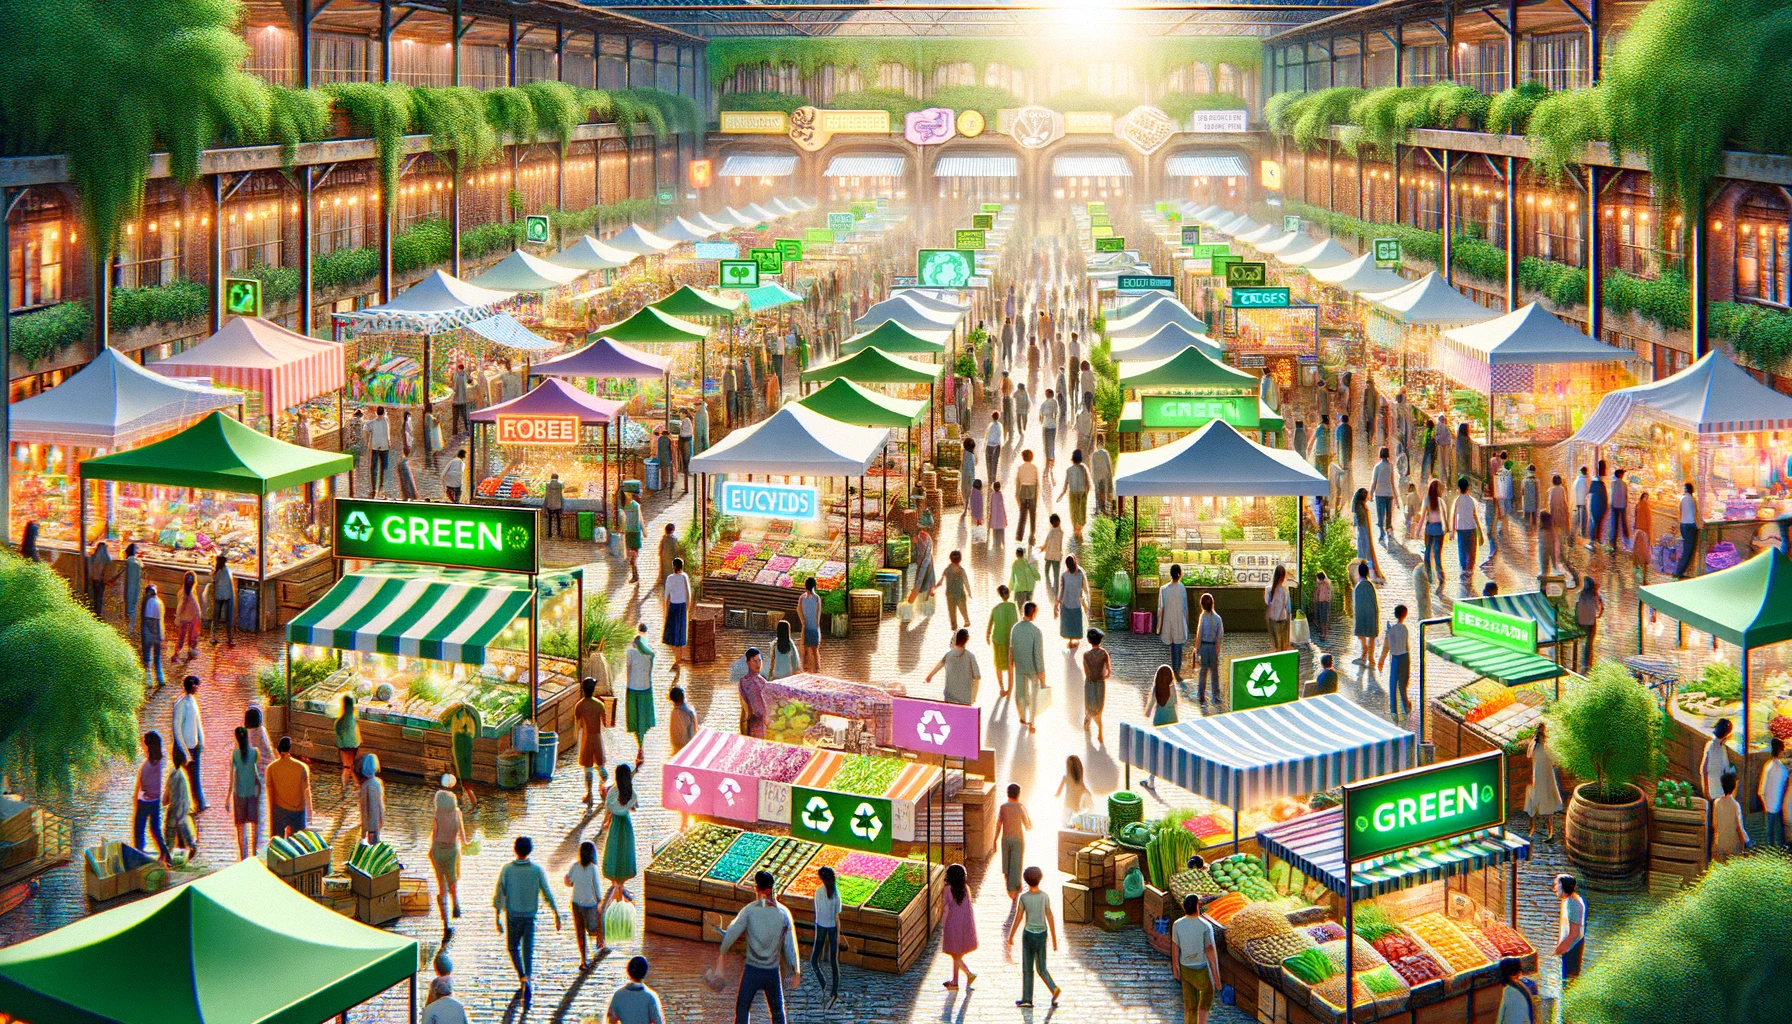 This image highlights why companies greenwash. It brings to life a bustling, vibrant marketplace, brimming with "green" and "sustainable" products, reflecting the strong consumer demand for eco-friendly goods. The scene captures the essence of a modern, conscious consumer culture that prioritizes sustainability and environmental responsibility.